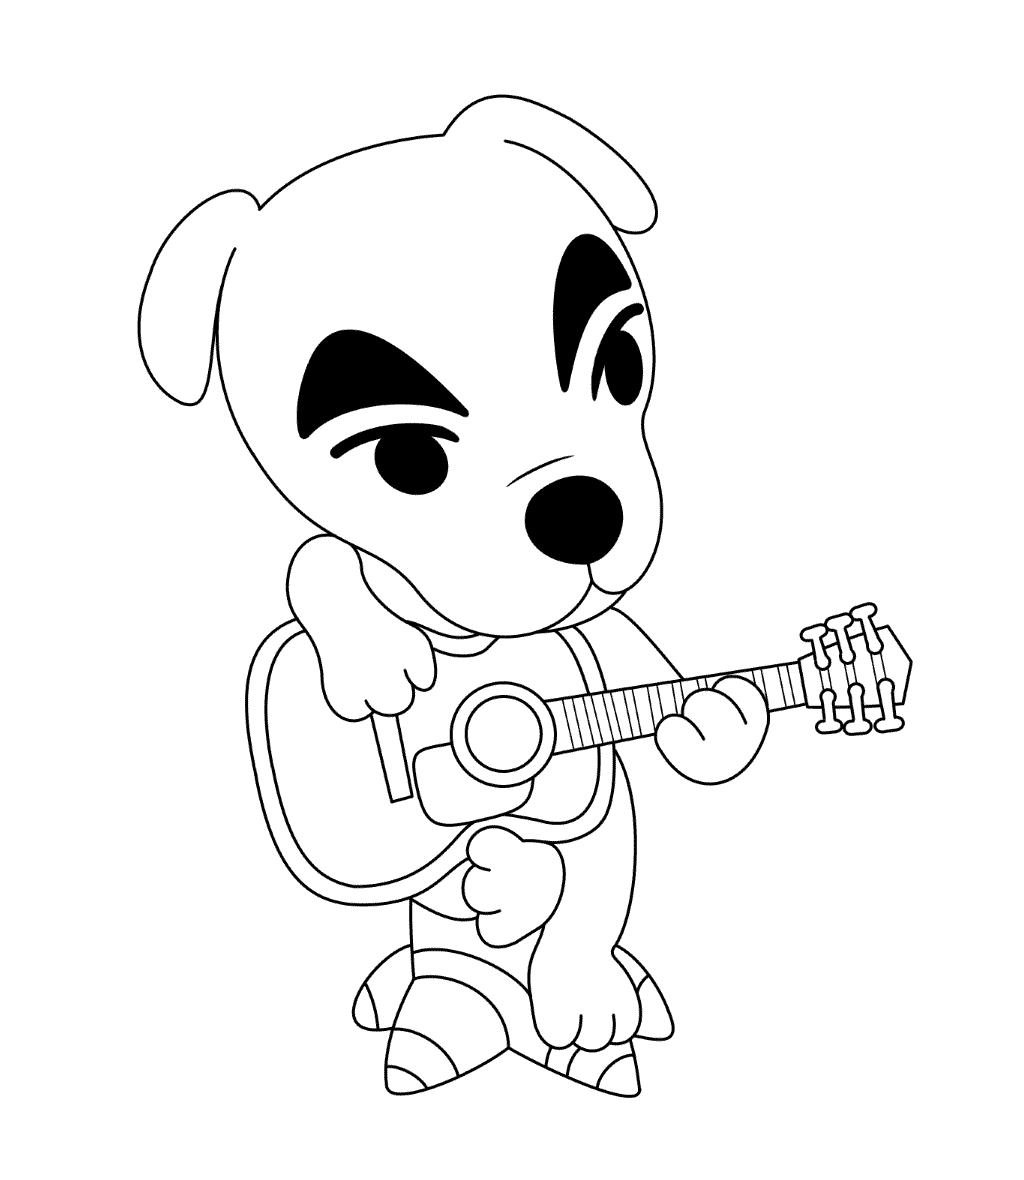 Jack Russell Coloring Pages - Best Coloring Pages For Kids